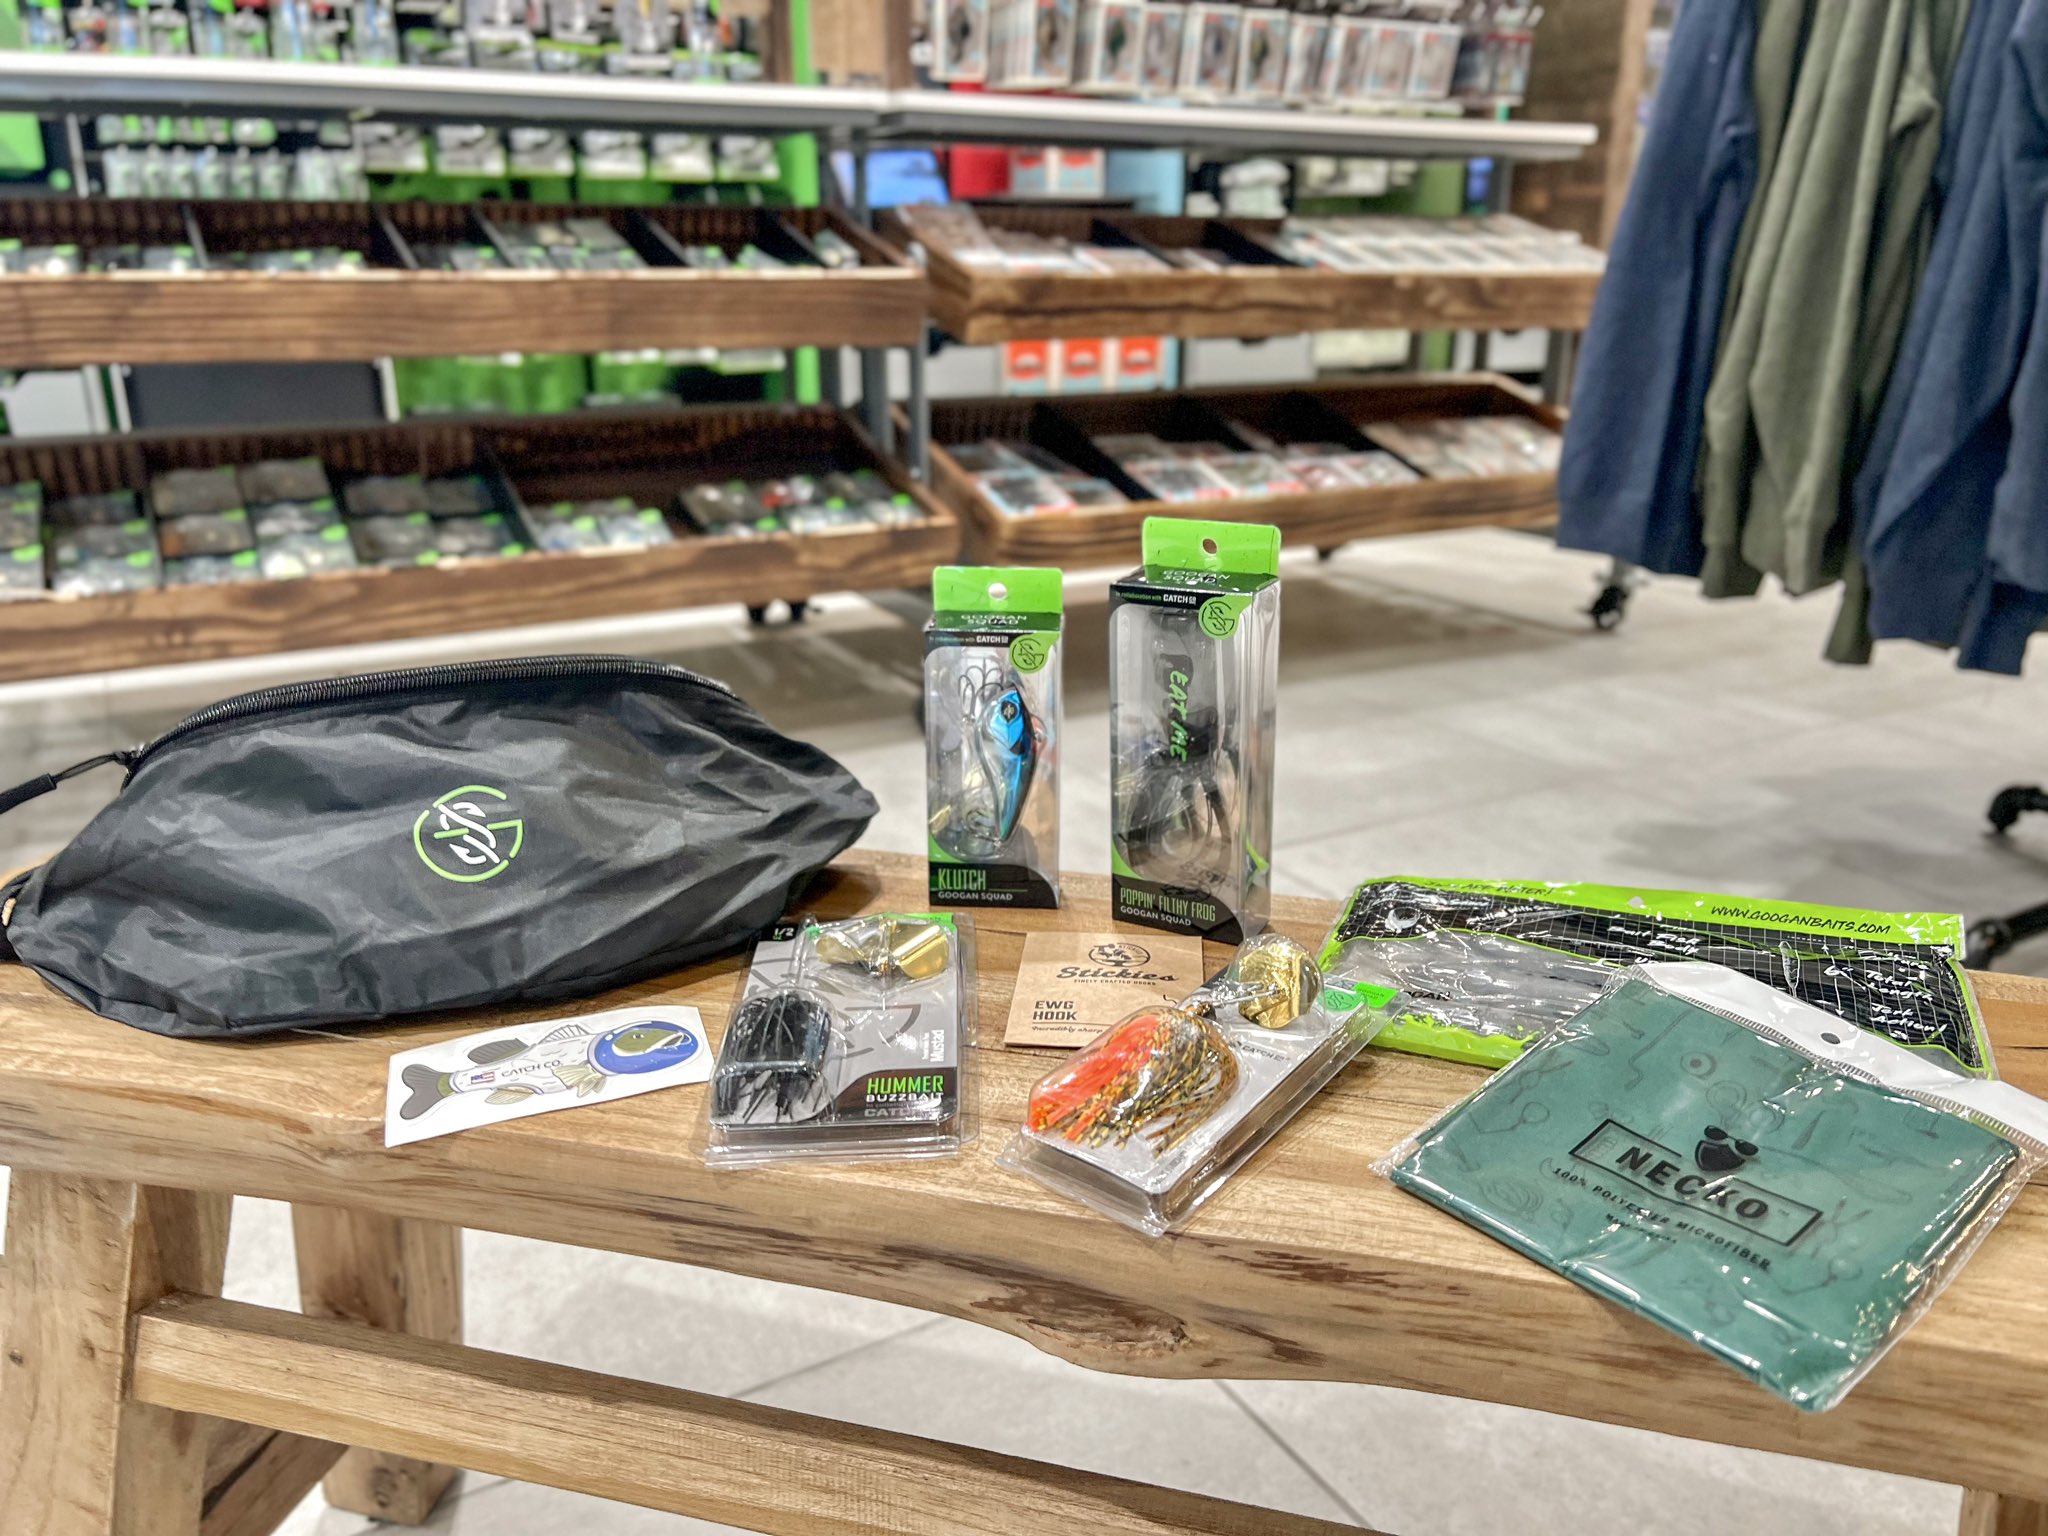 Mall of America on X: Gift the unexpected! Now - 6 p.m., score 50% off a  Googan Fanny Pack + 5 mystery lures at Karl's Fishing & Outdoors located on  Level 1